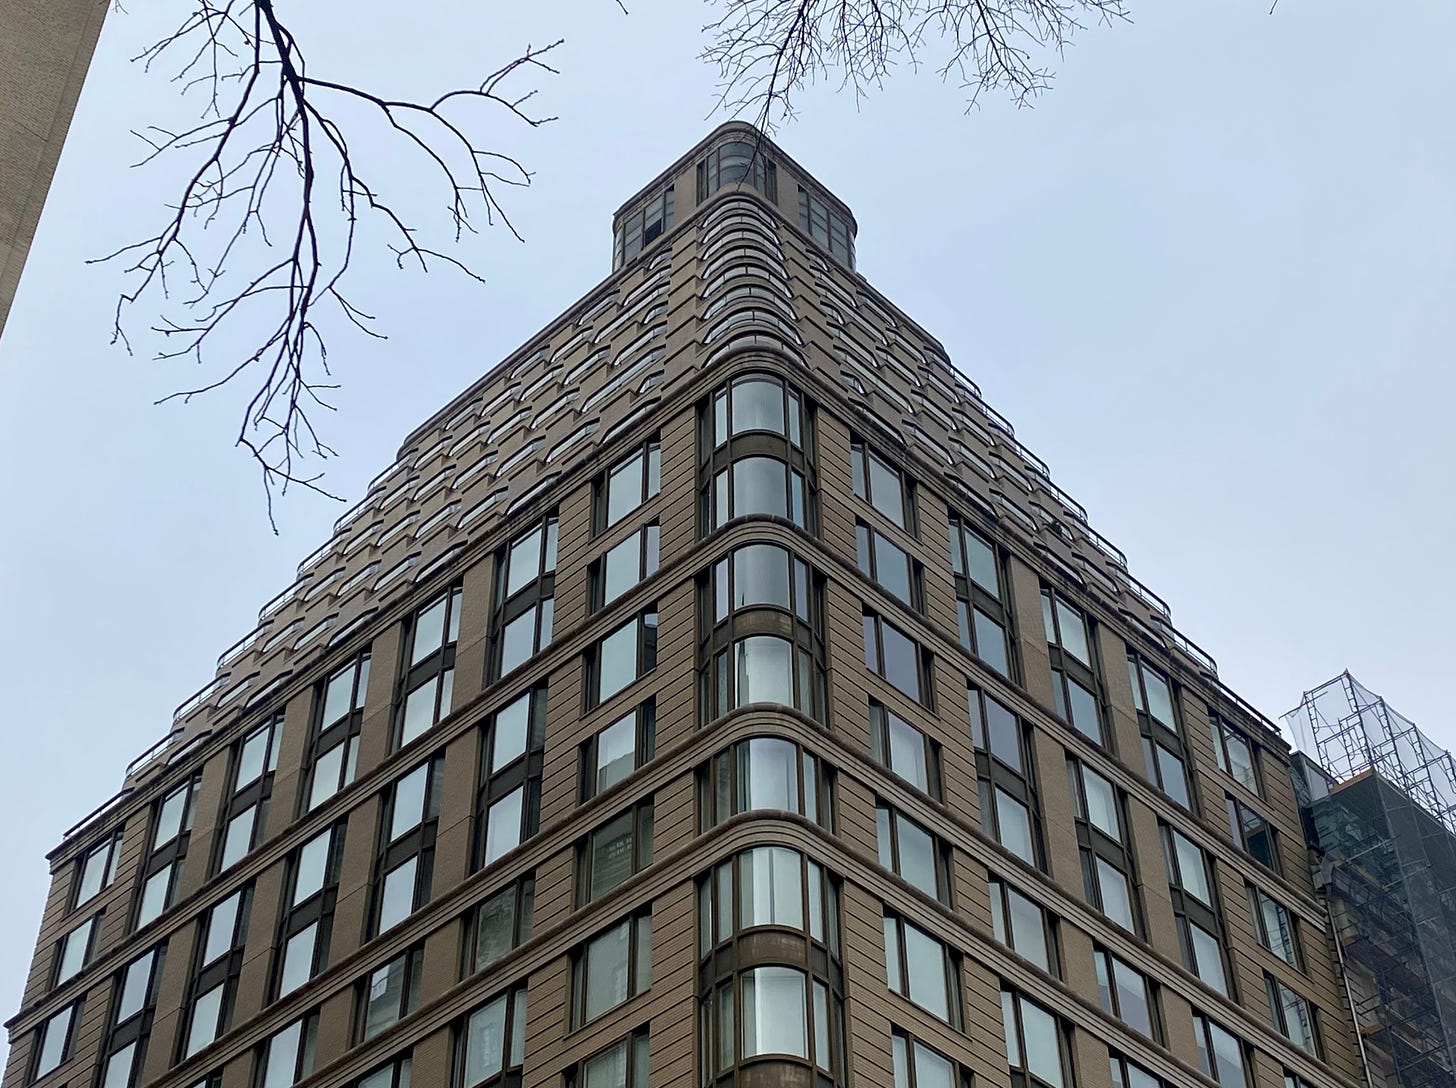 An upper west side apartment building with curved corners, stepping back to the roof.